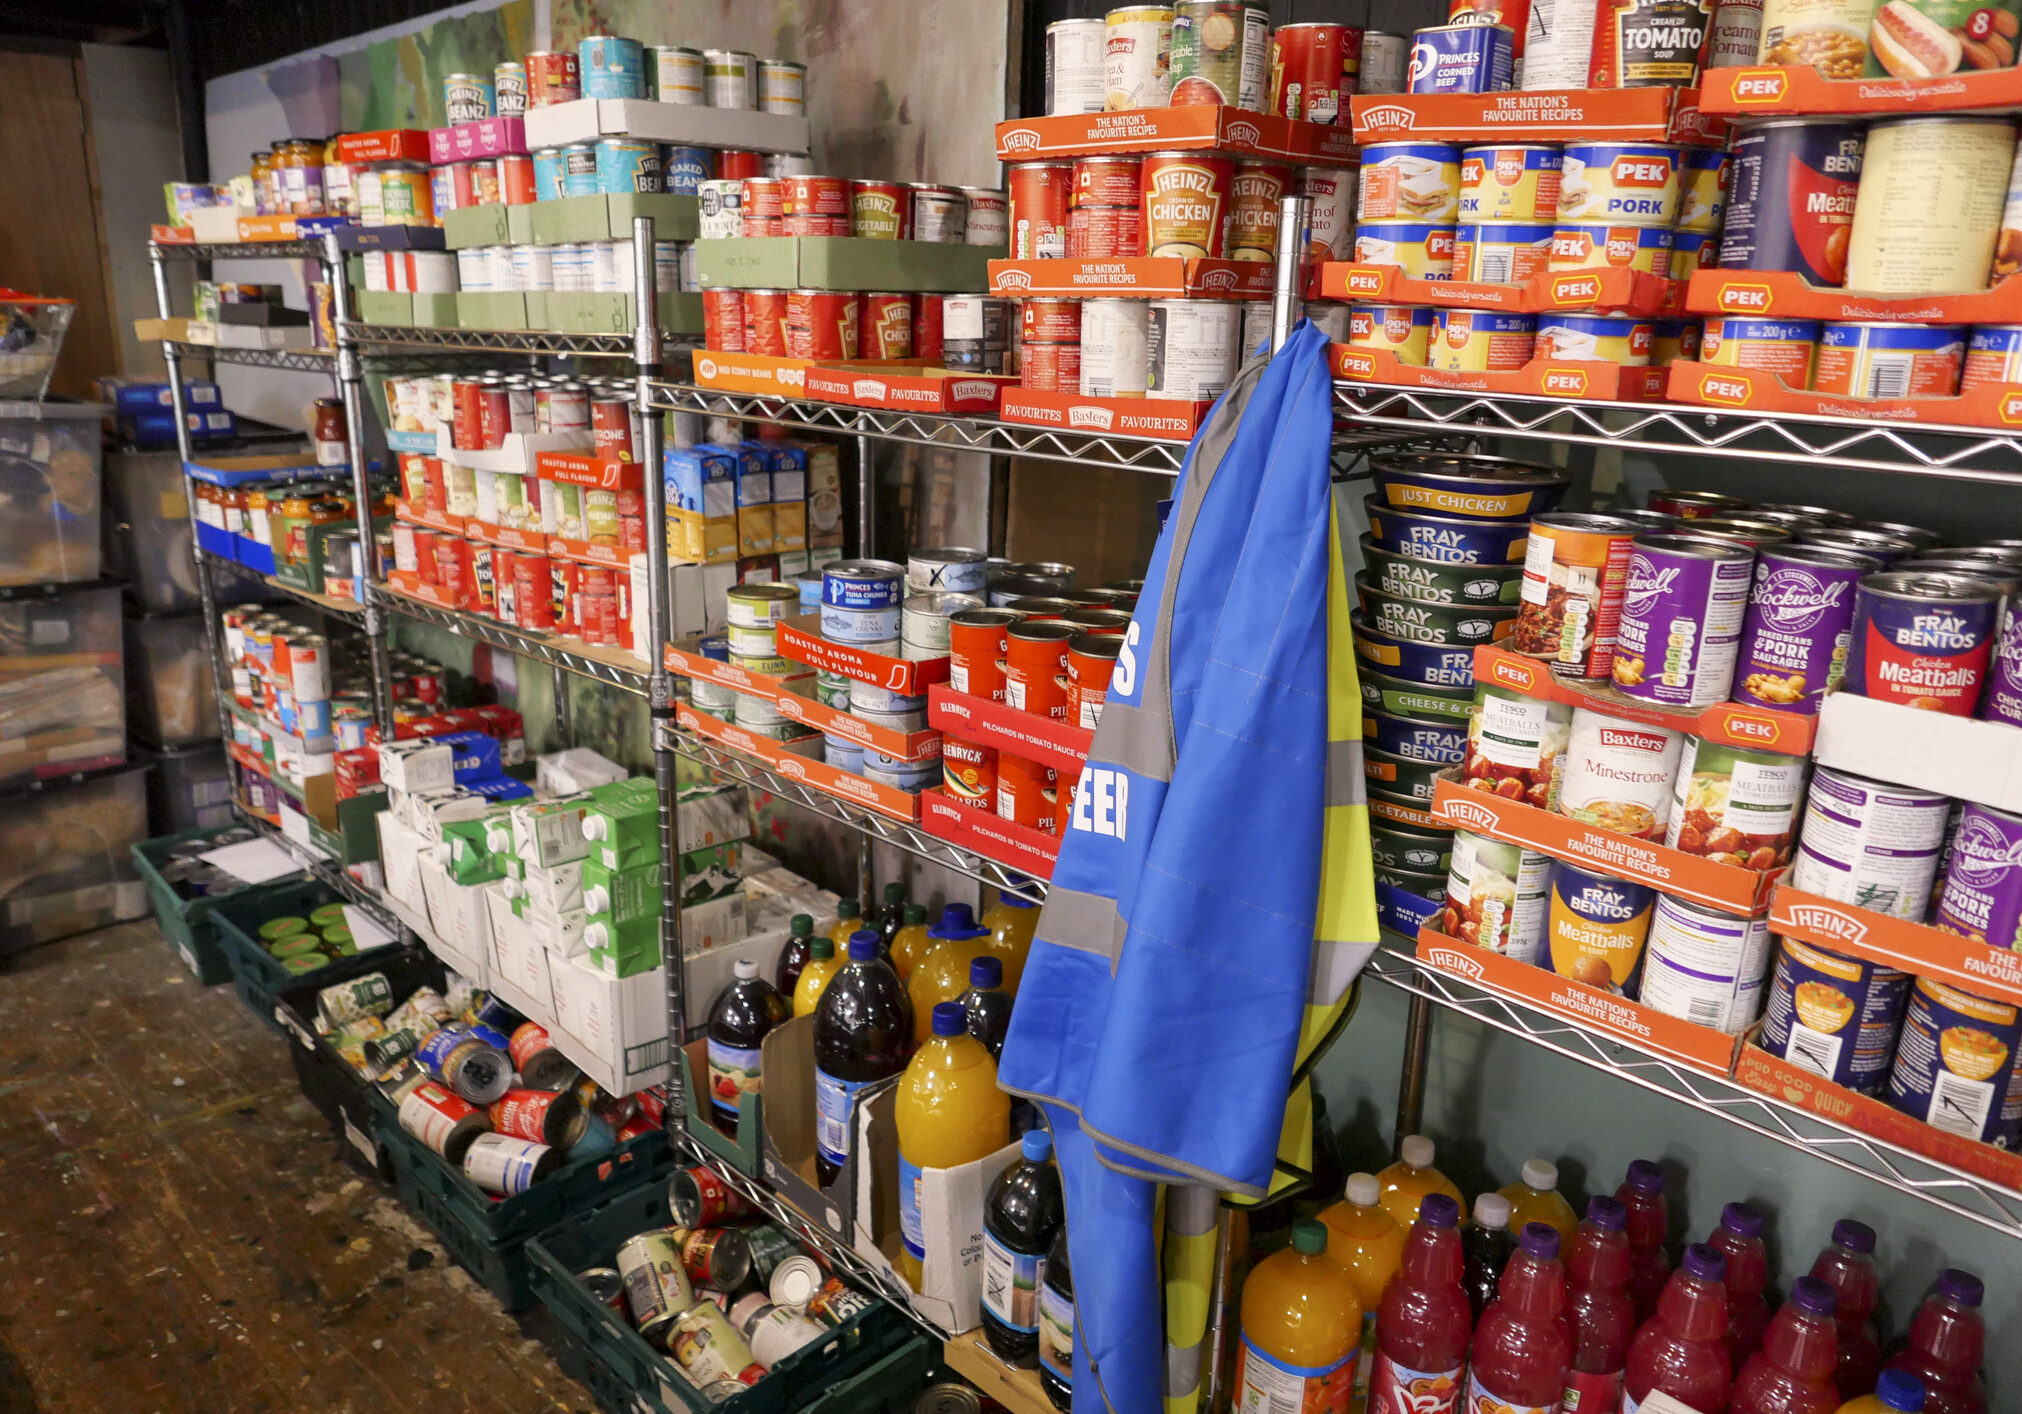 7th August 2020: Shelves filled with donated food, ready for distribution at a charity food bank centre in the town of Penicuik in Midlothian, Scotland, where emergency food parcels are given to those in crisis. A problem that has increased since the Covid-19 pandemic, with more people losing jobs and getting into financial difficulty.